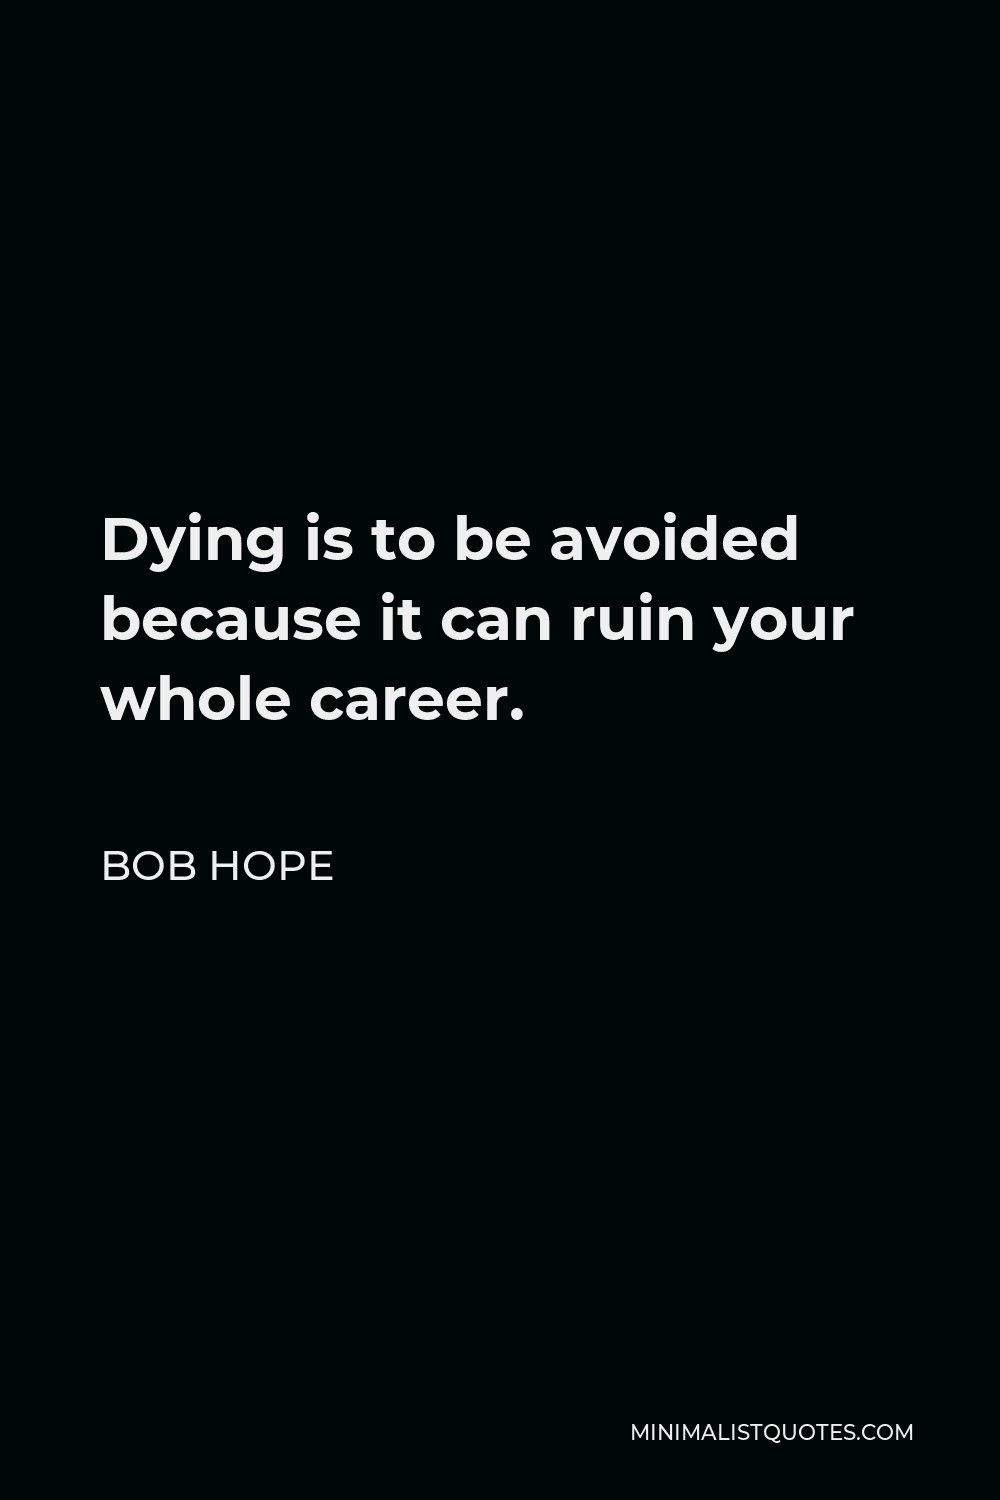 Bob Hope Quote - Dying is to be avoided because it can ruin your whole career.